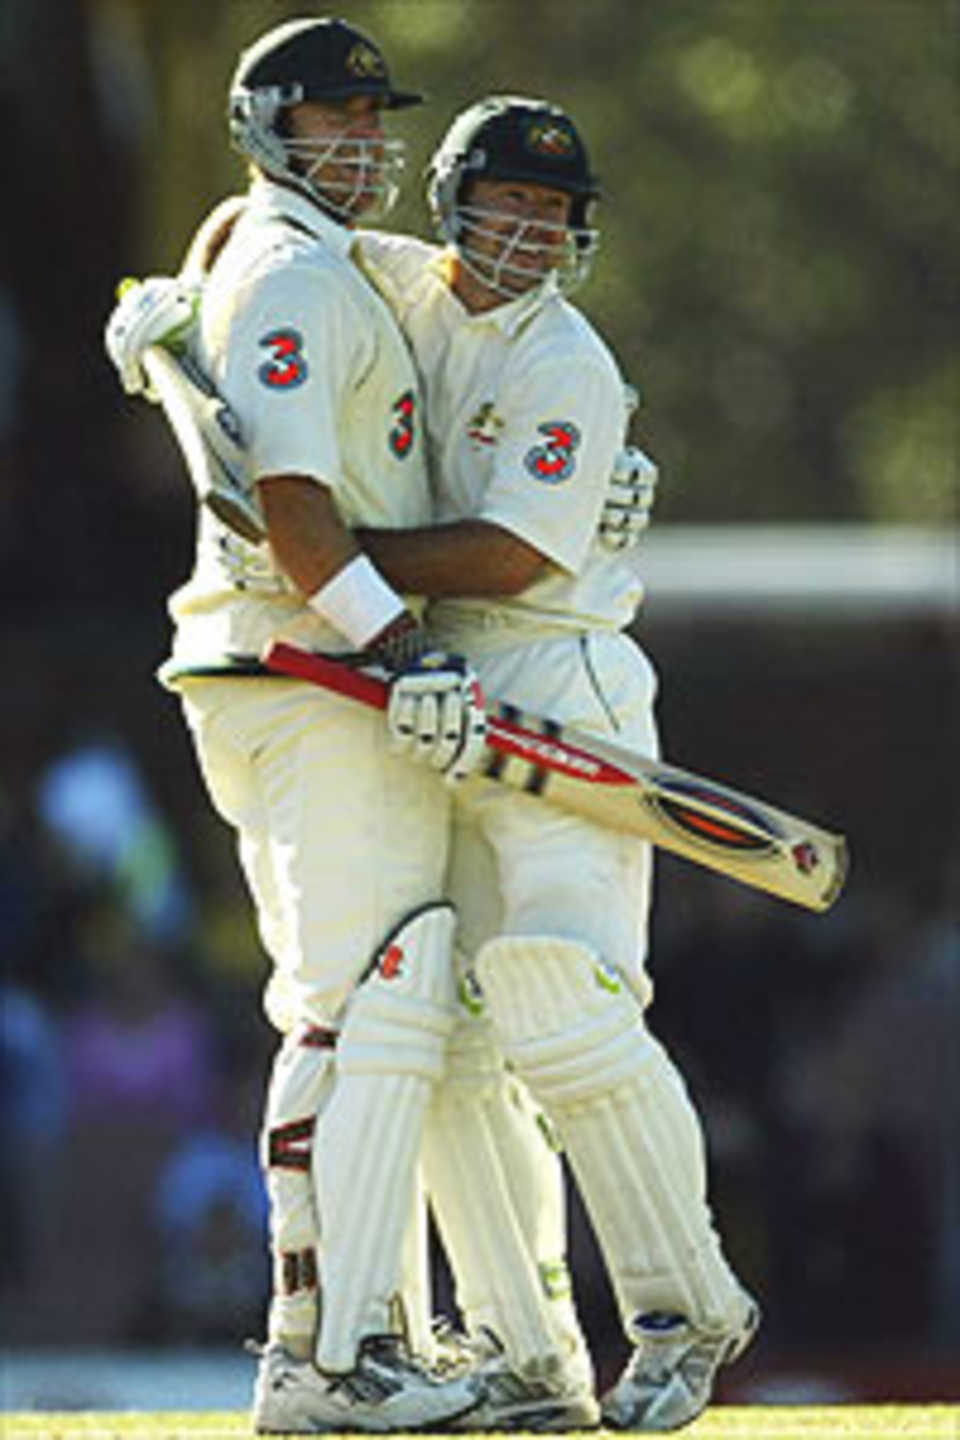 Matthew Hayden of Australia is congratulated by team mate Ricky Ponting on reaching his century and equalsing the score during day four of the second Test between Australia and Zimbabwe played at the SCG on October 20, 2003 in Sydney, Australia.